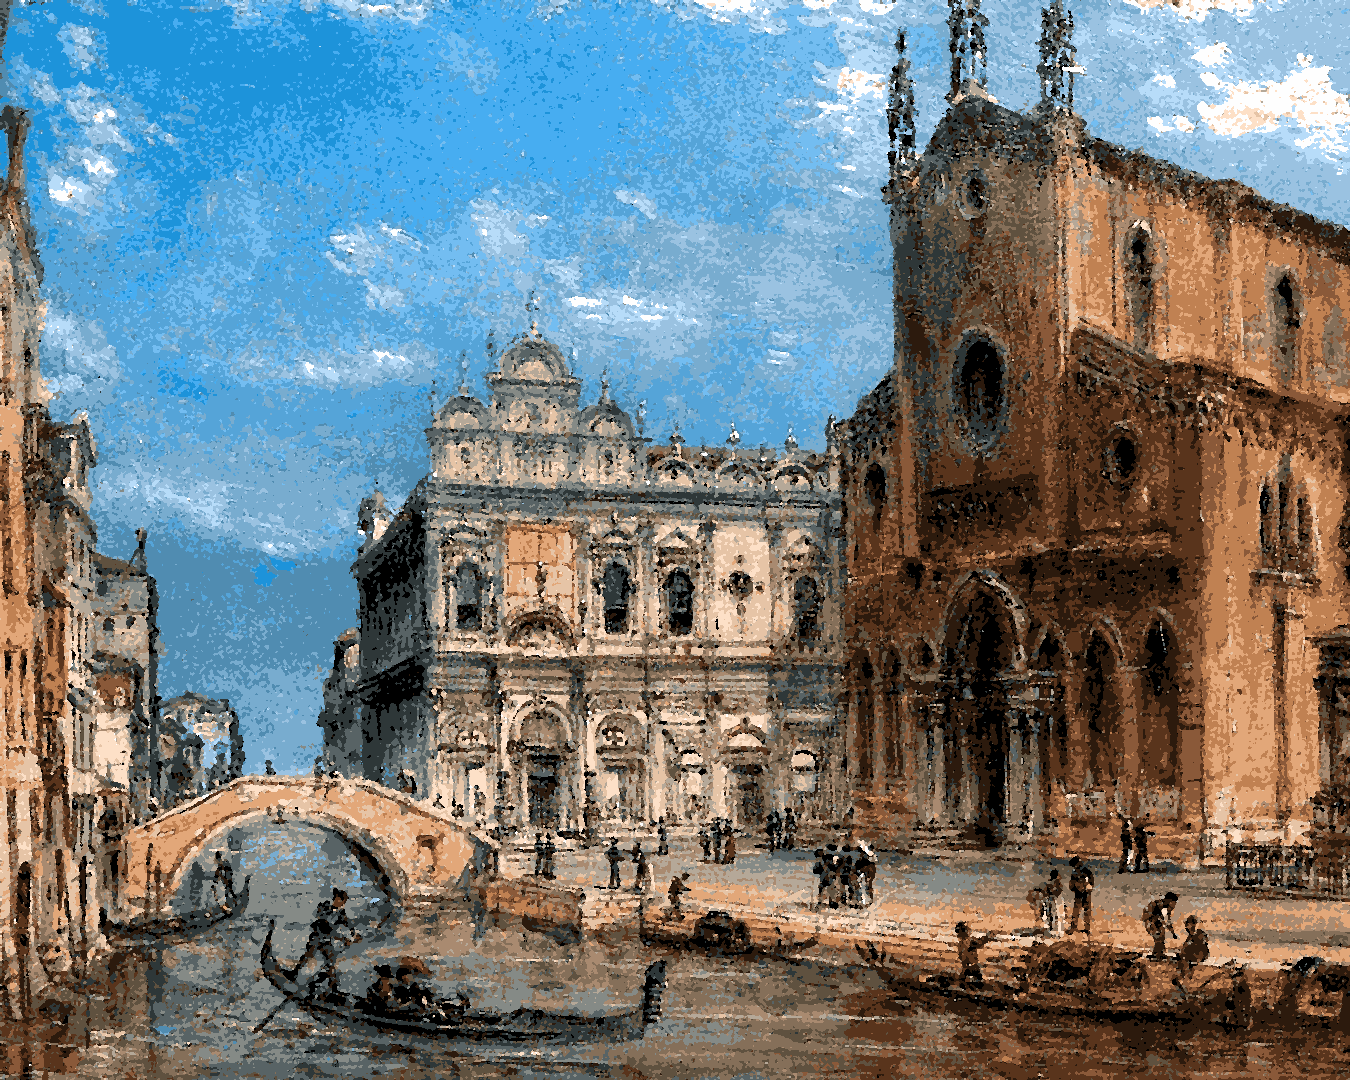 Venice, Italy Collection PD (37) - a view of San Zanipolo by Giovanni Grubacs - Van-Go Paint-By-Number Kit